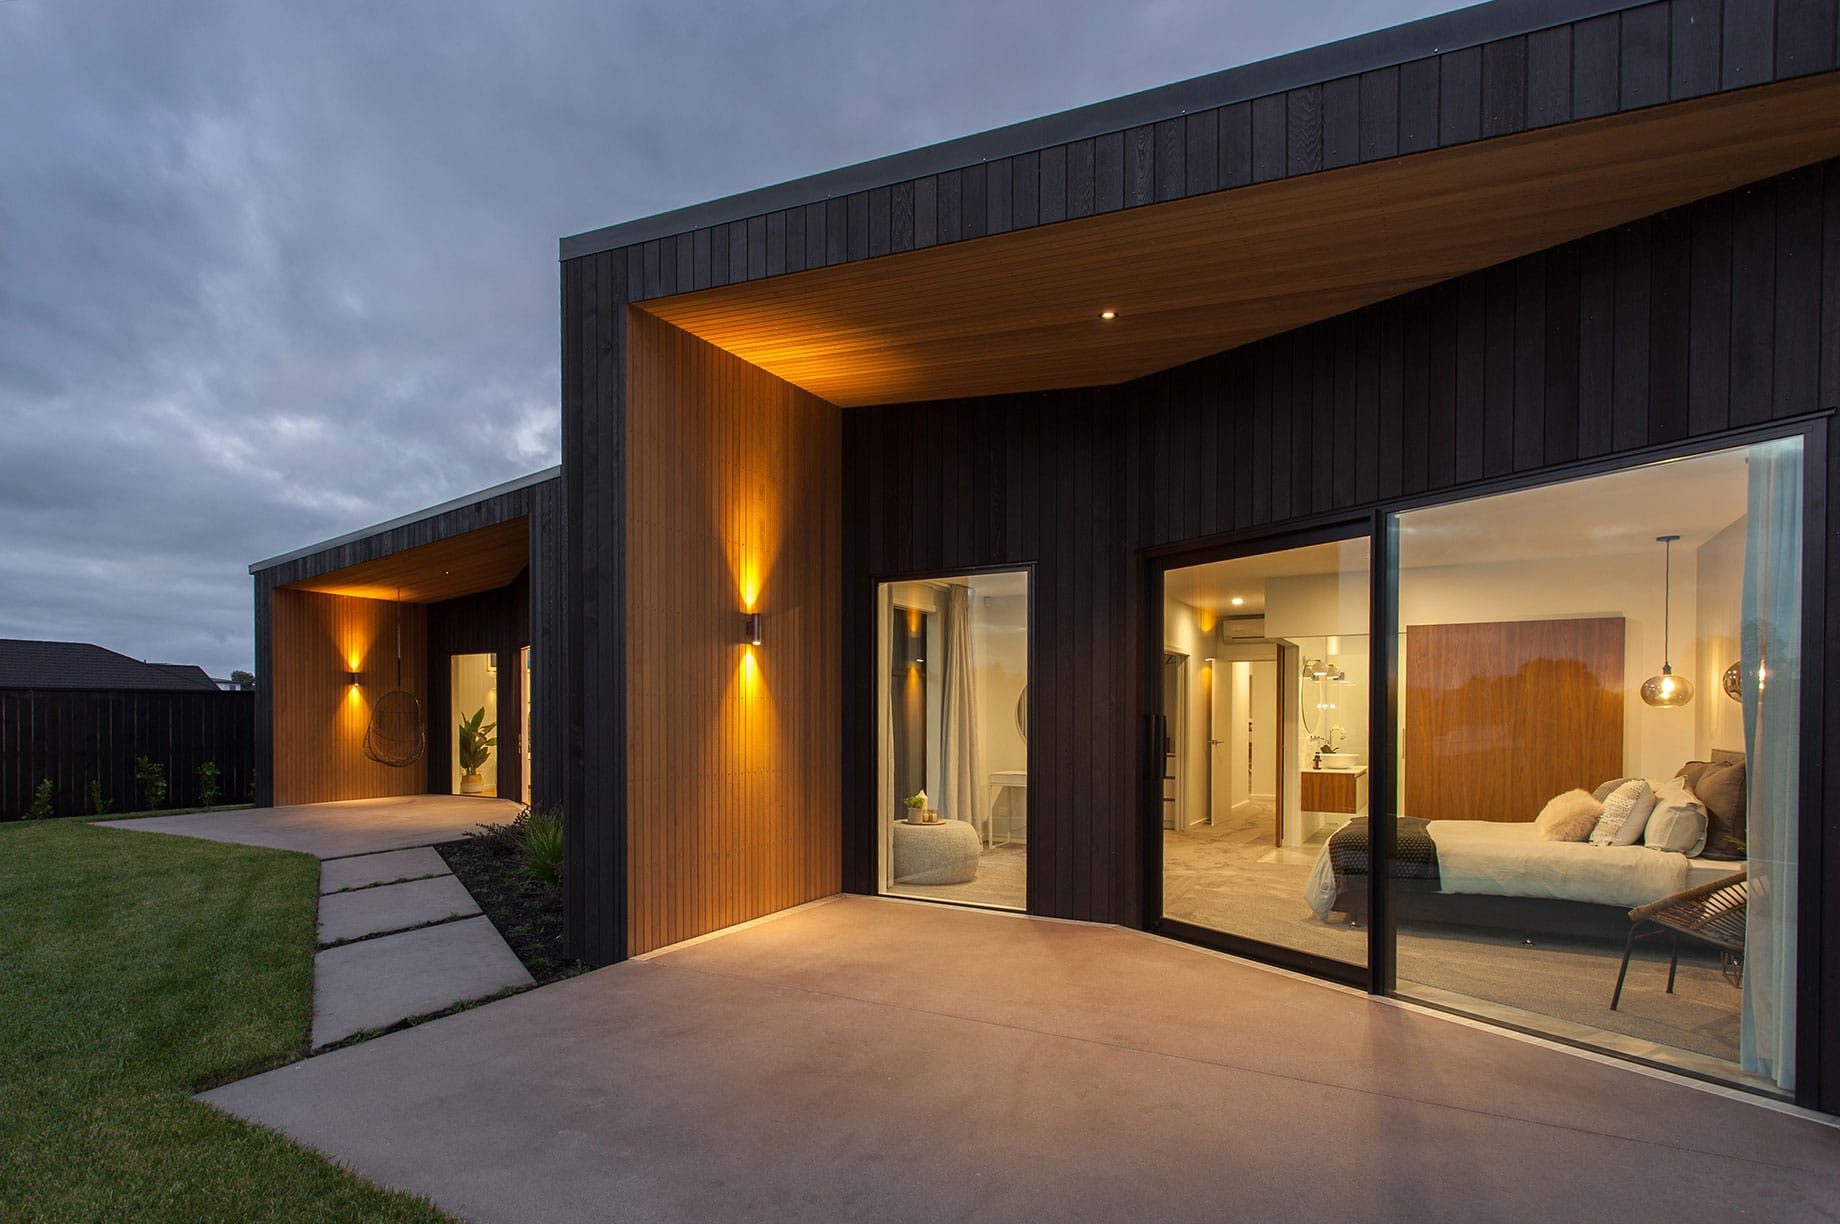 Waikato showhome exterior in evening time